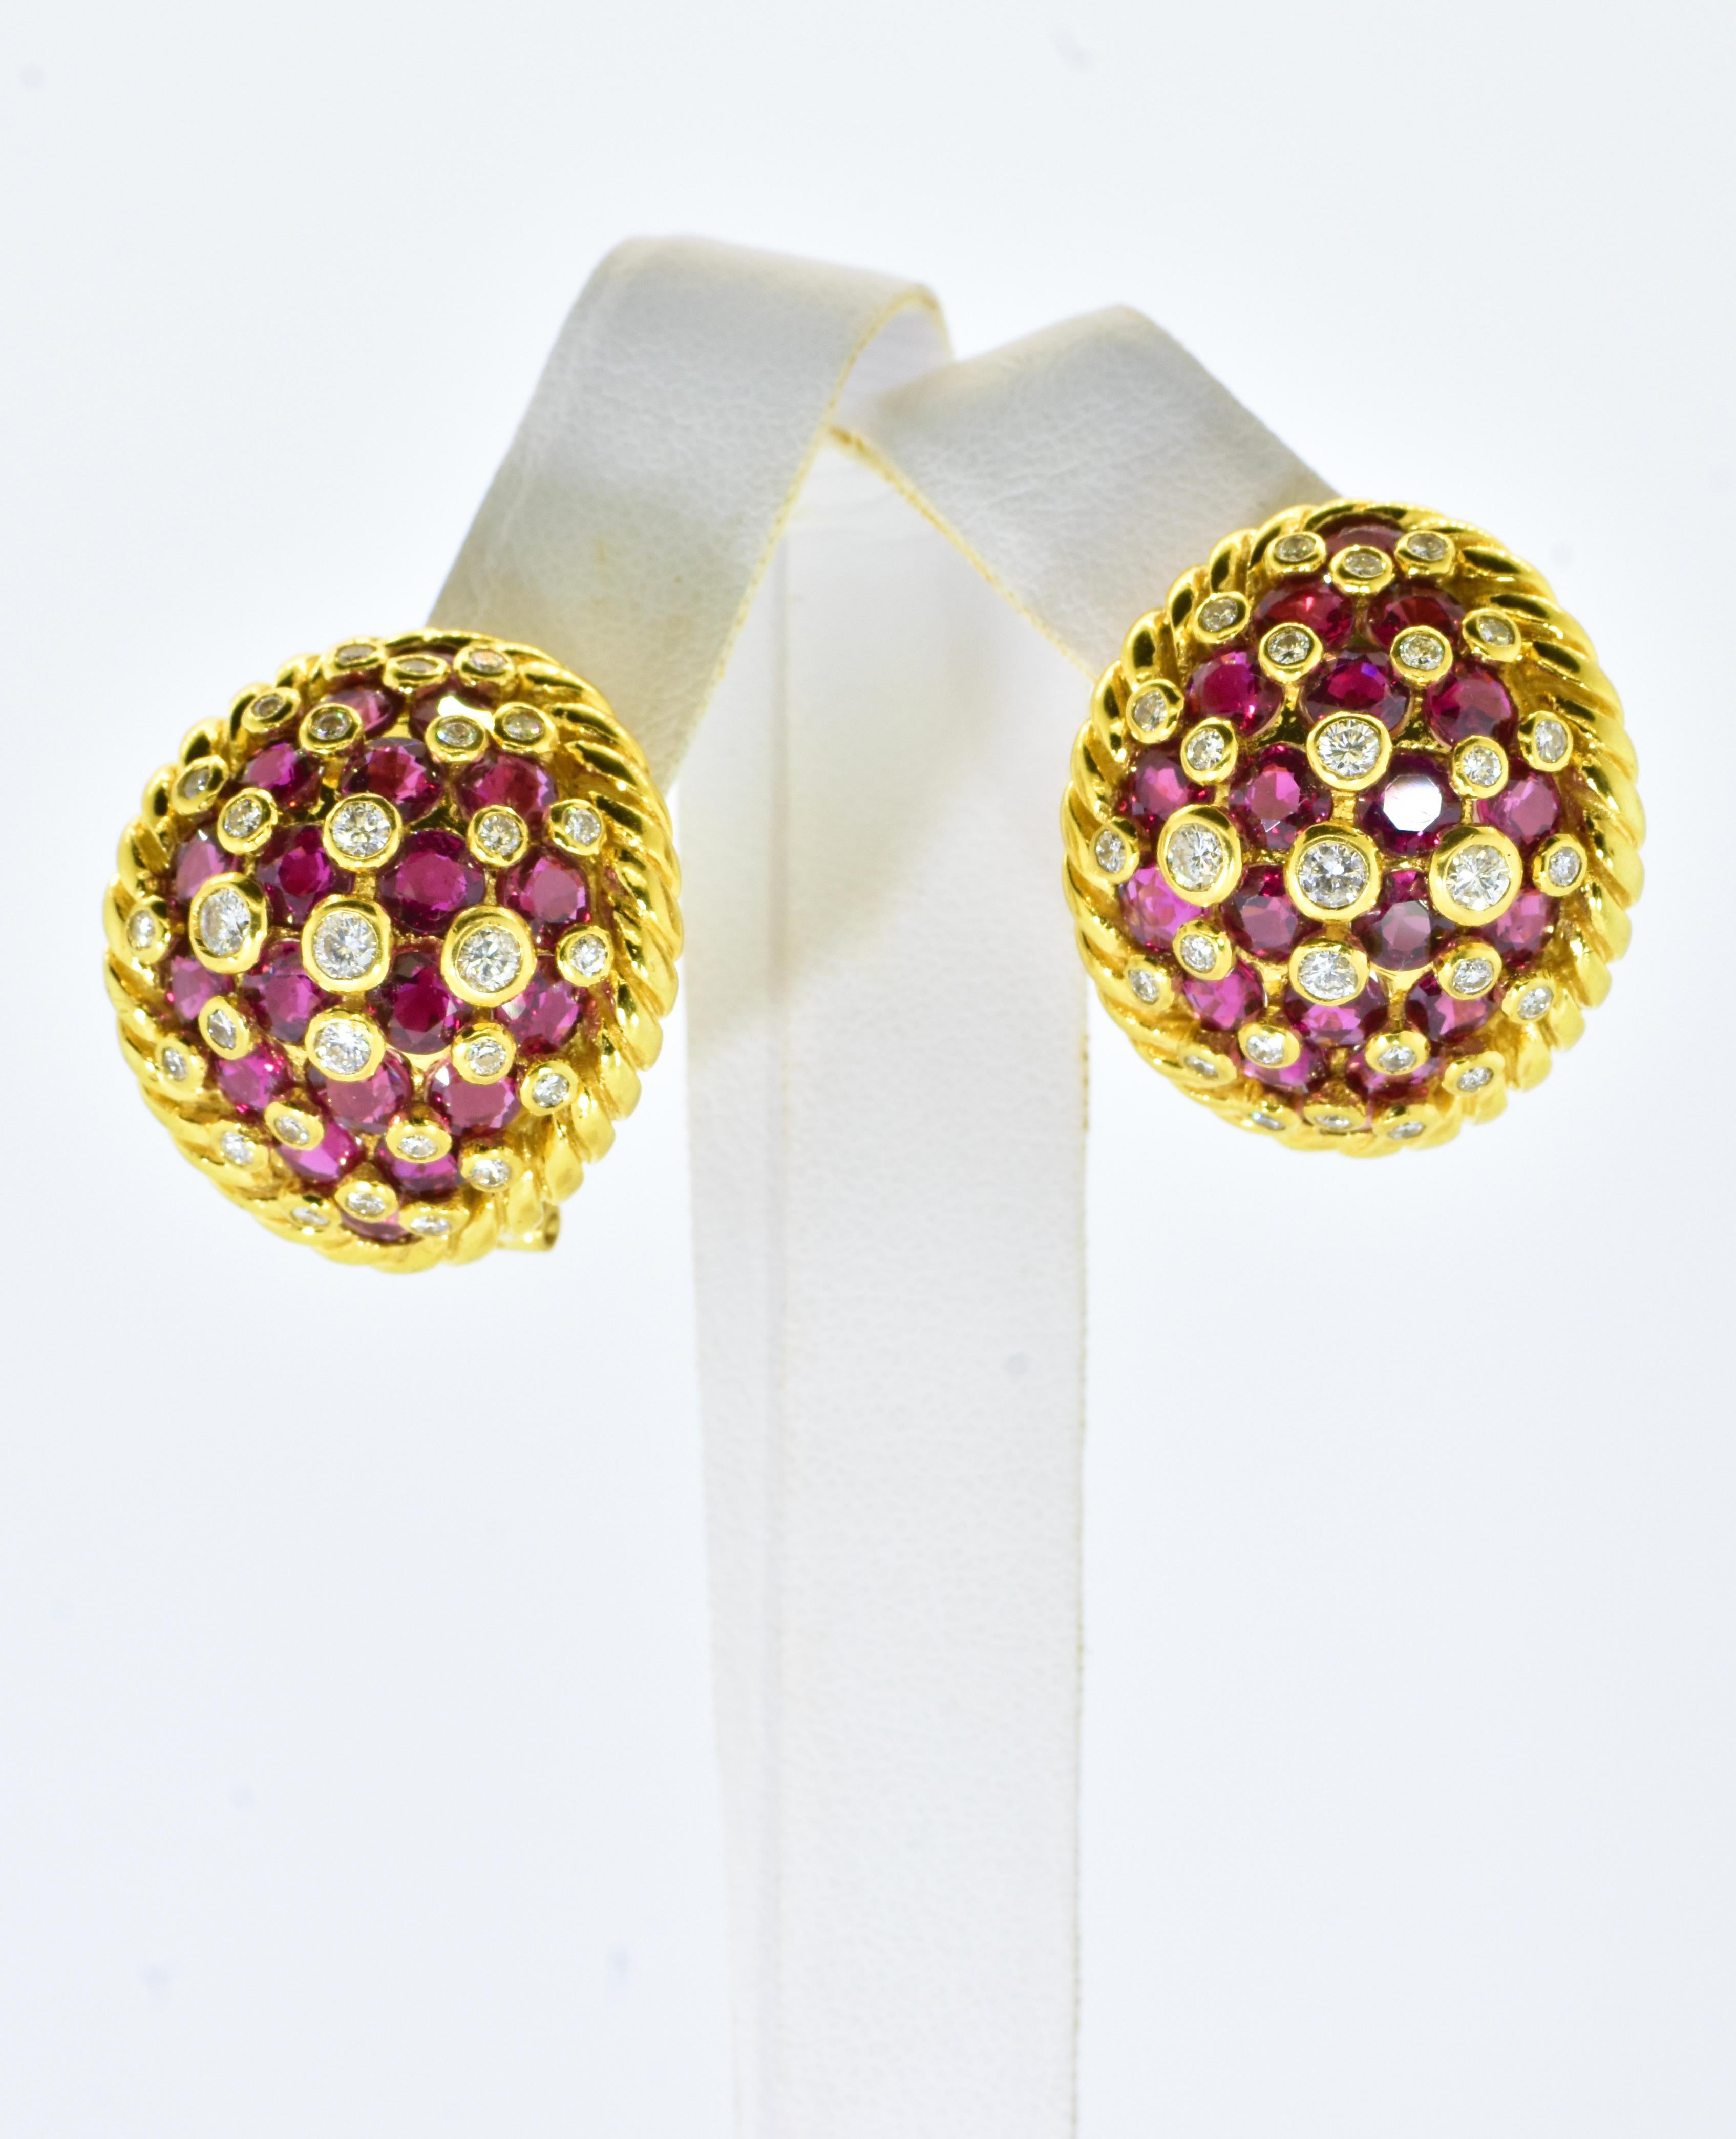 18K, Diamond and Ruby vintage Earrings.   These earrings done in 18K yellow gold were set with diamonds and rubies.  They have a weight of 22.6 grams, possess 58 diamonds estimated to weigh 1.90 cts. these diamonds are all well matched in their fine